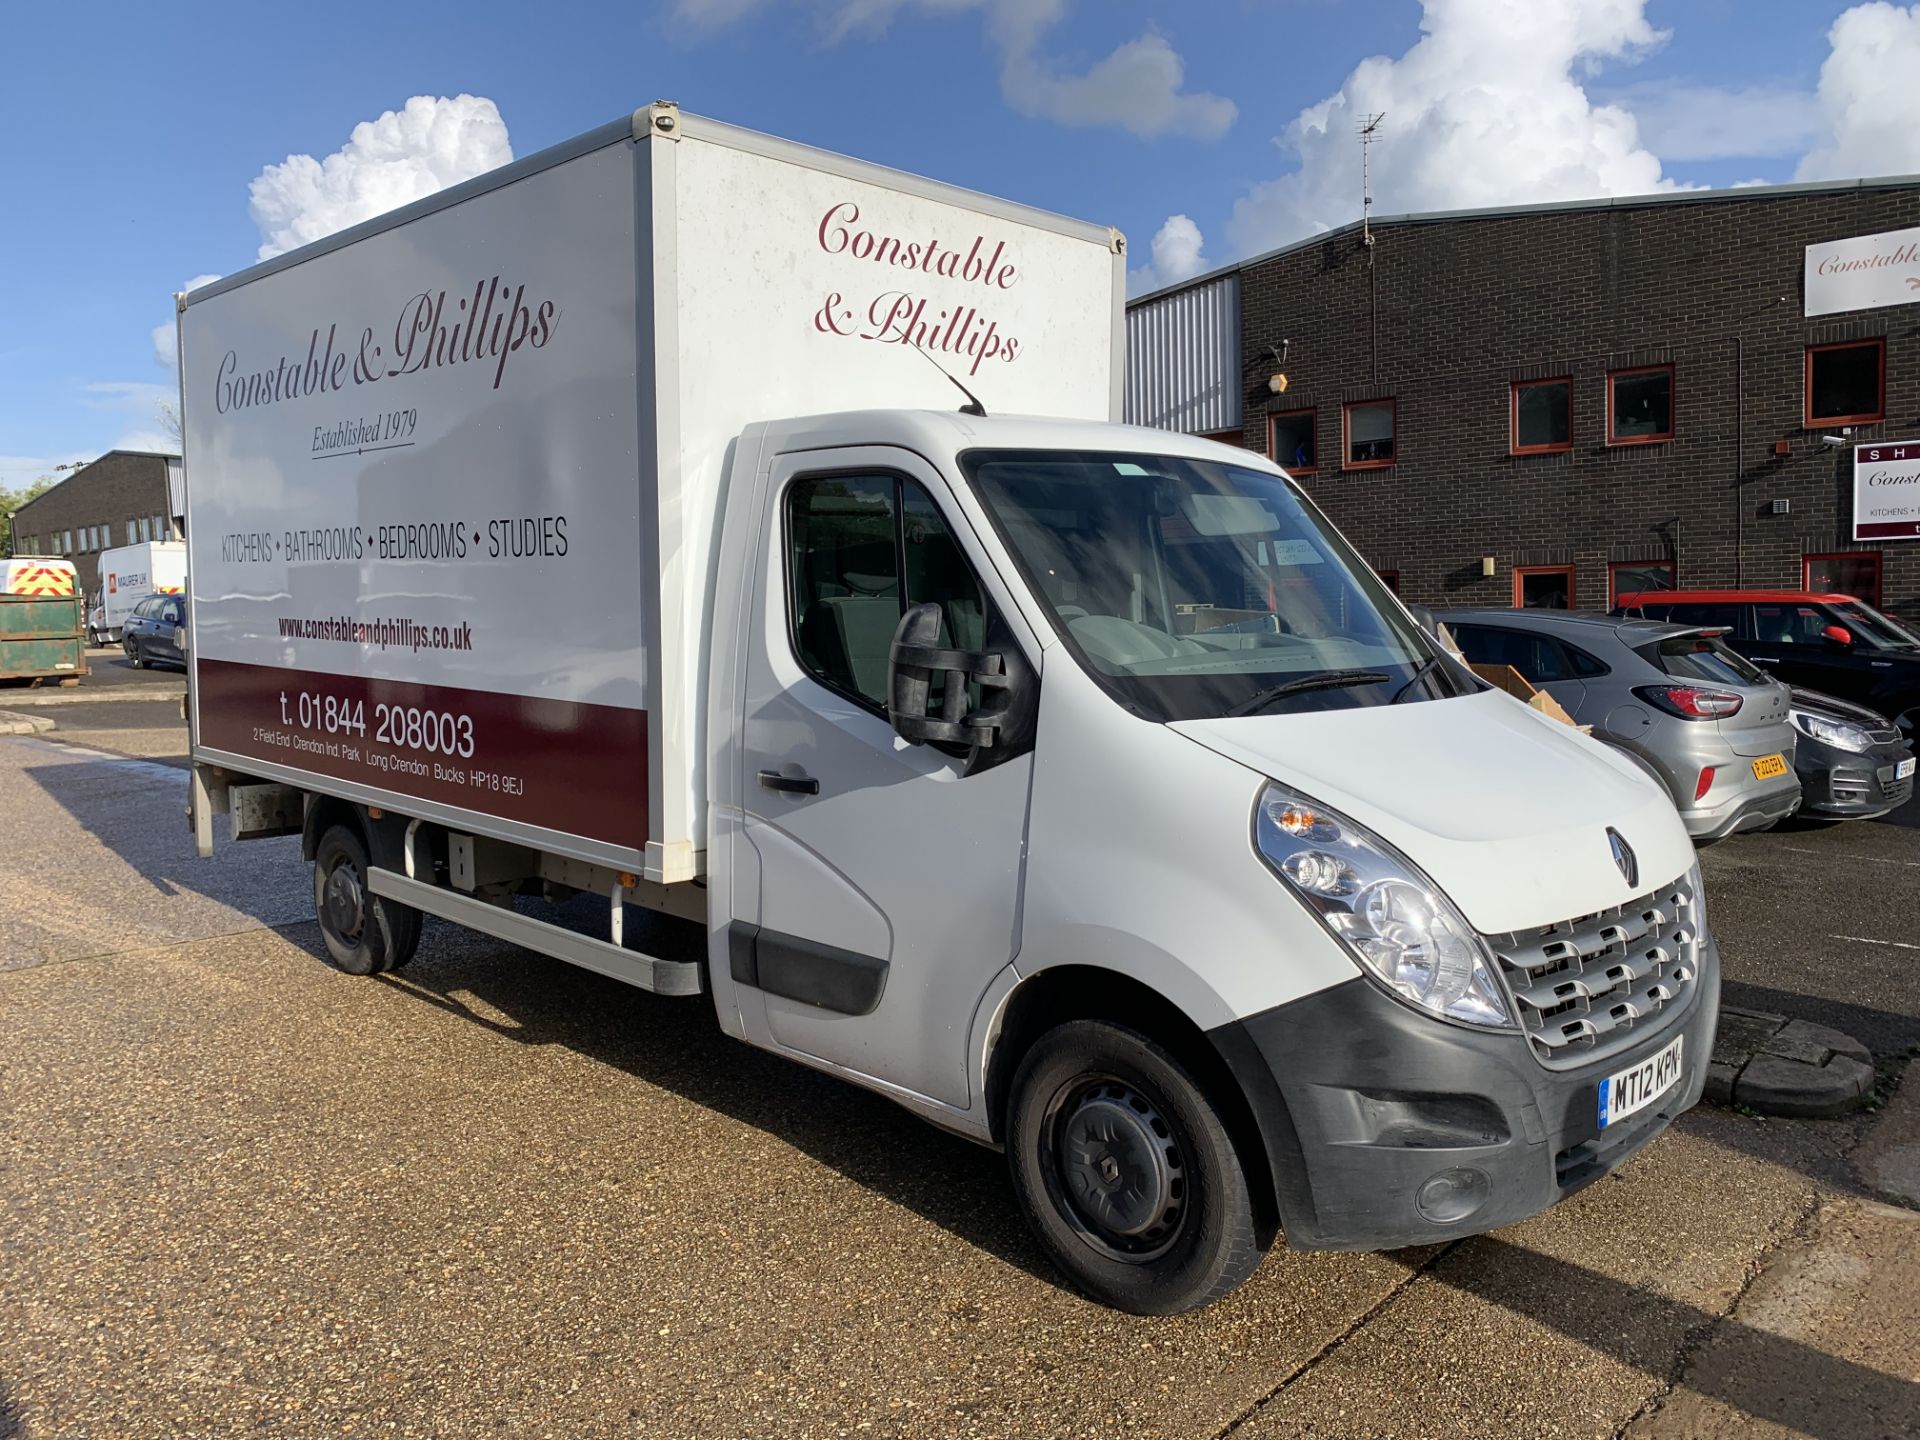 (2012) Renault Master LWB Diesel FWD LL35dci 125 Low Roof Box Van with Tail Lift - Image 3 of 6